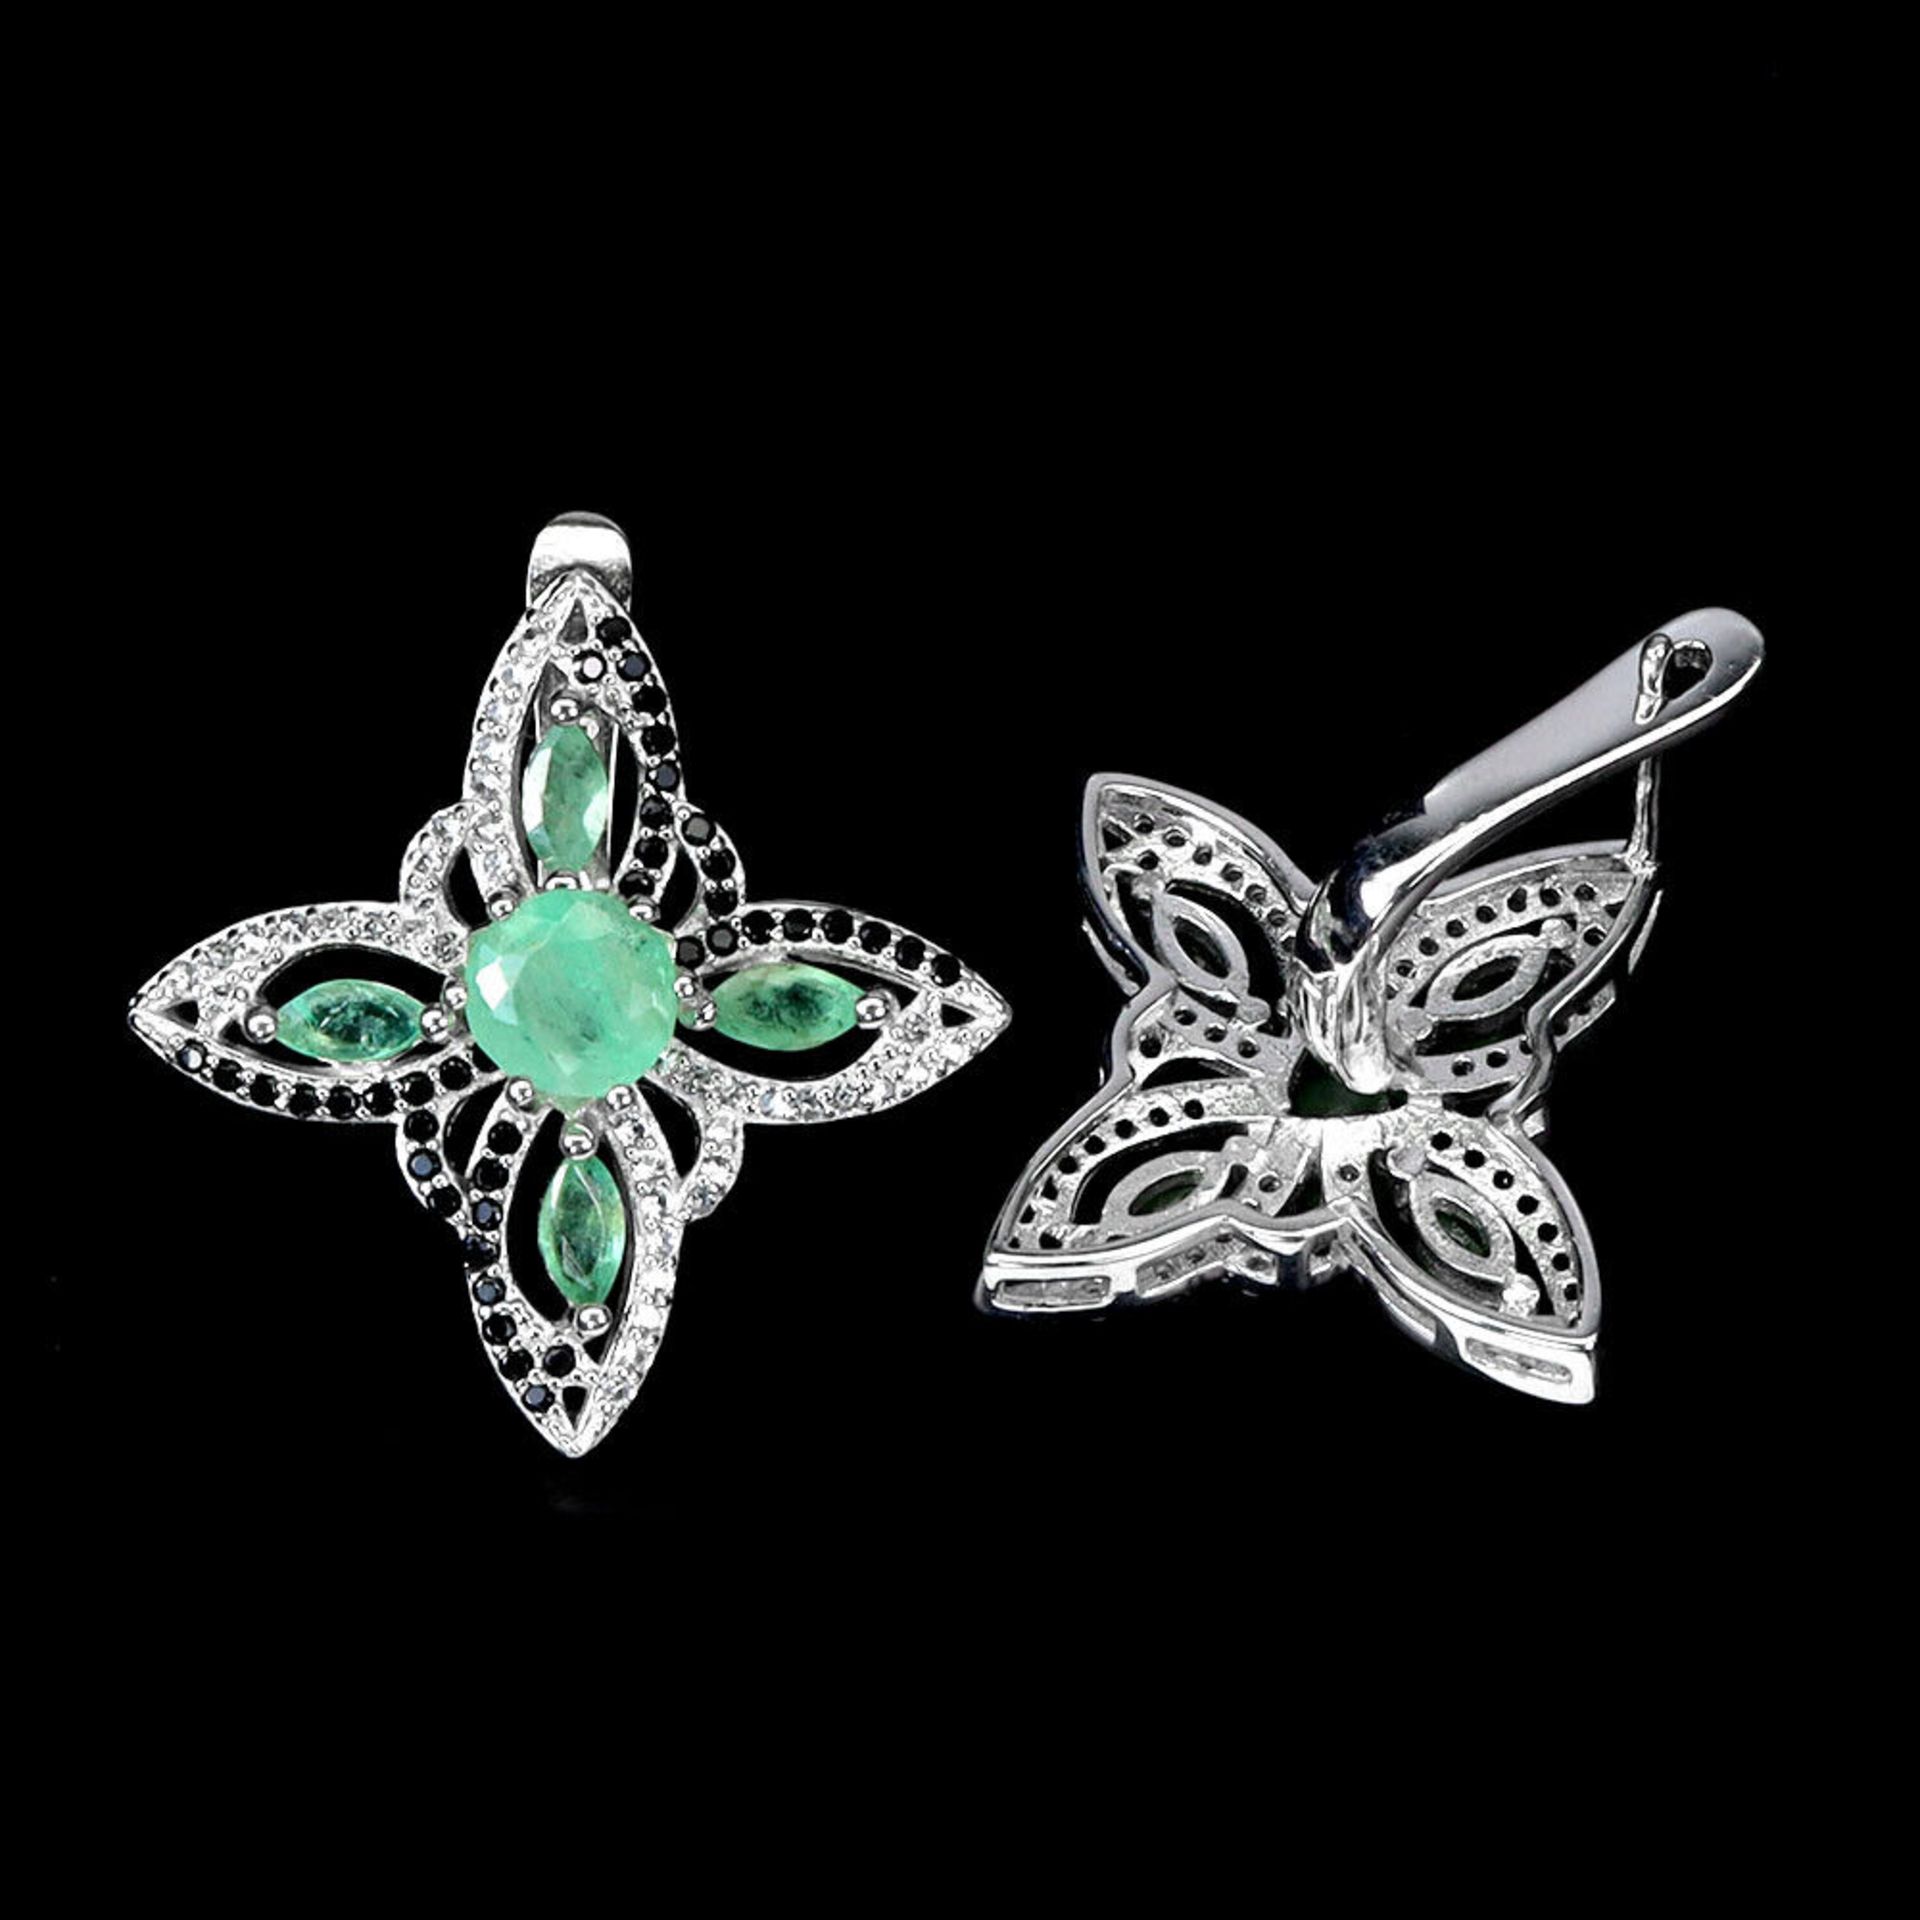 A matching pair of 925 silver earrings set with emeralds and black spinels, L. 2.6cm. - Image 2 of 2